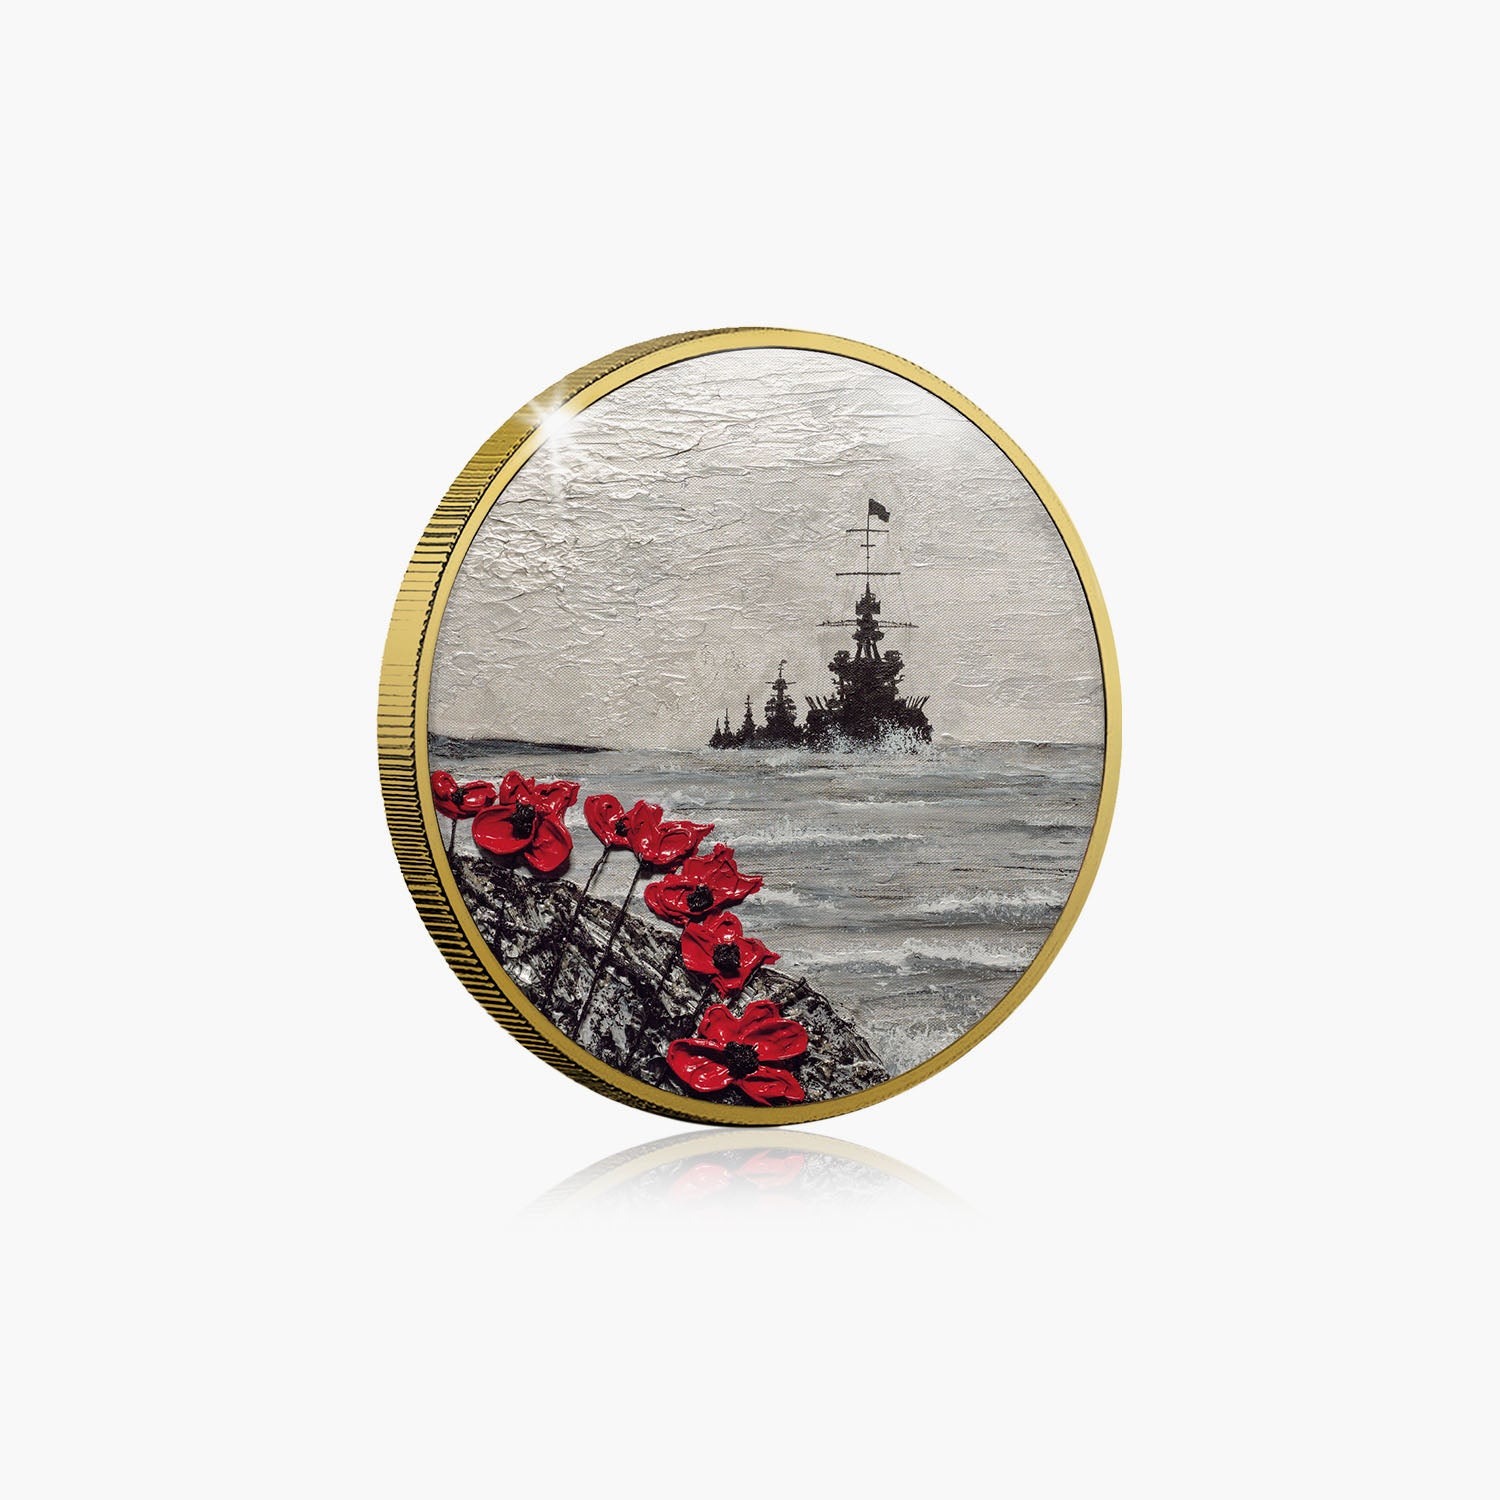 Where The Sea Winds Blow, Gold-Plated Commemorative